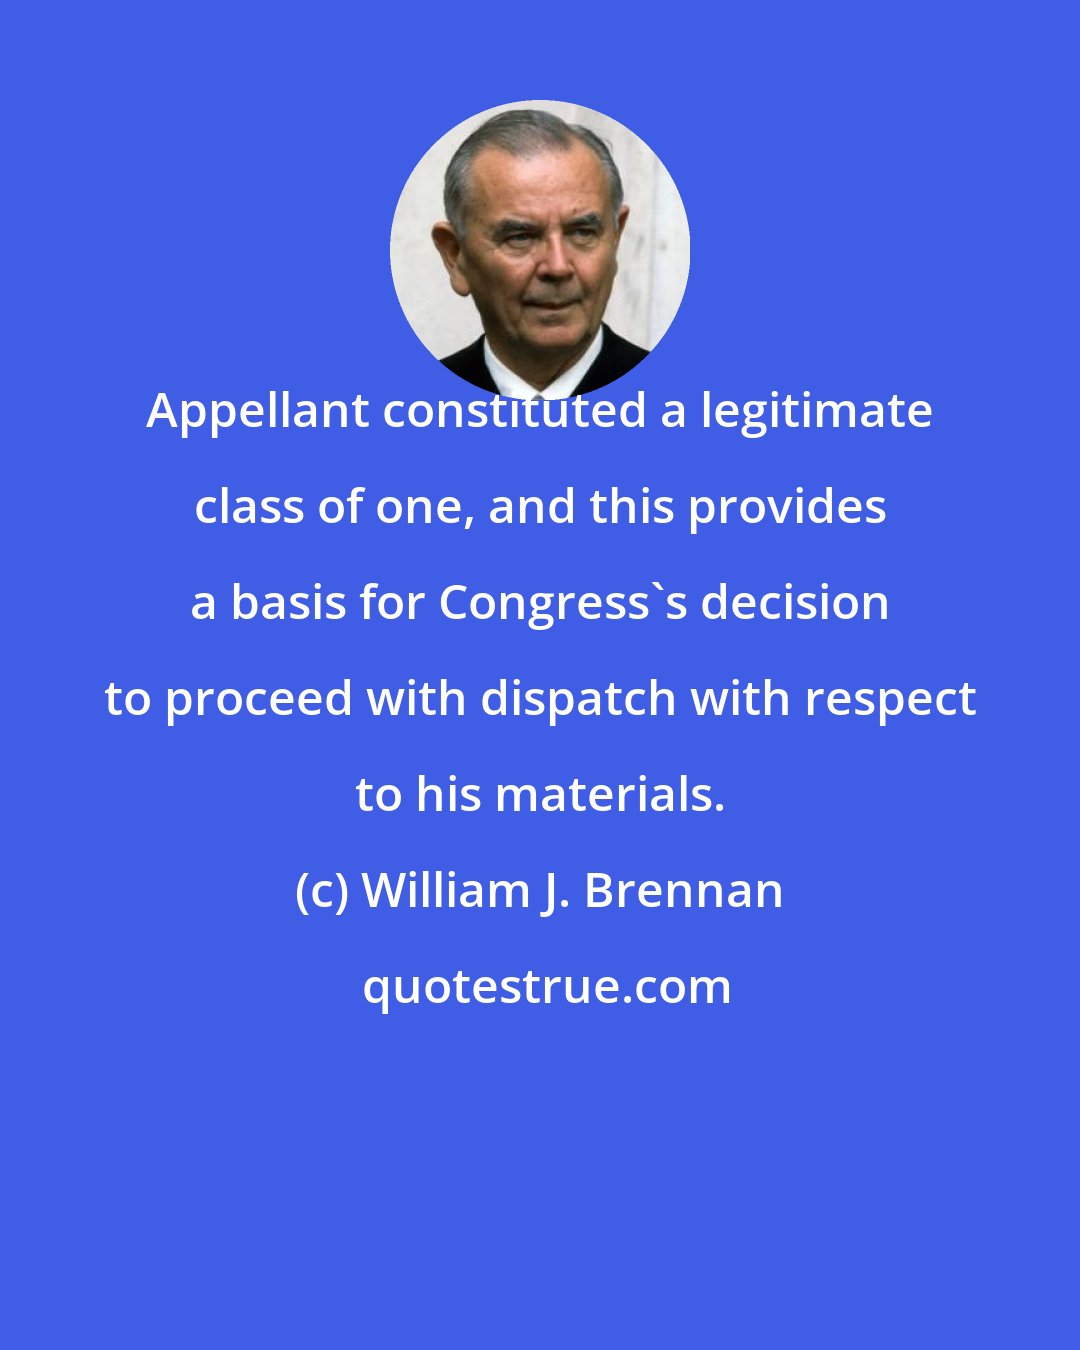 William J. Brennan: Appellant constituted a legitimate class of one, and this provides a basis for Congress's decision to proceed with dispatch with respect to his materials.